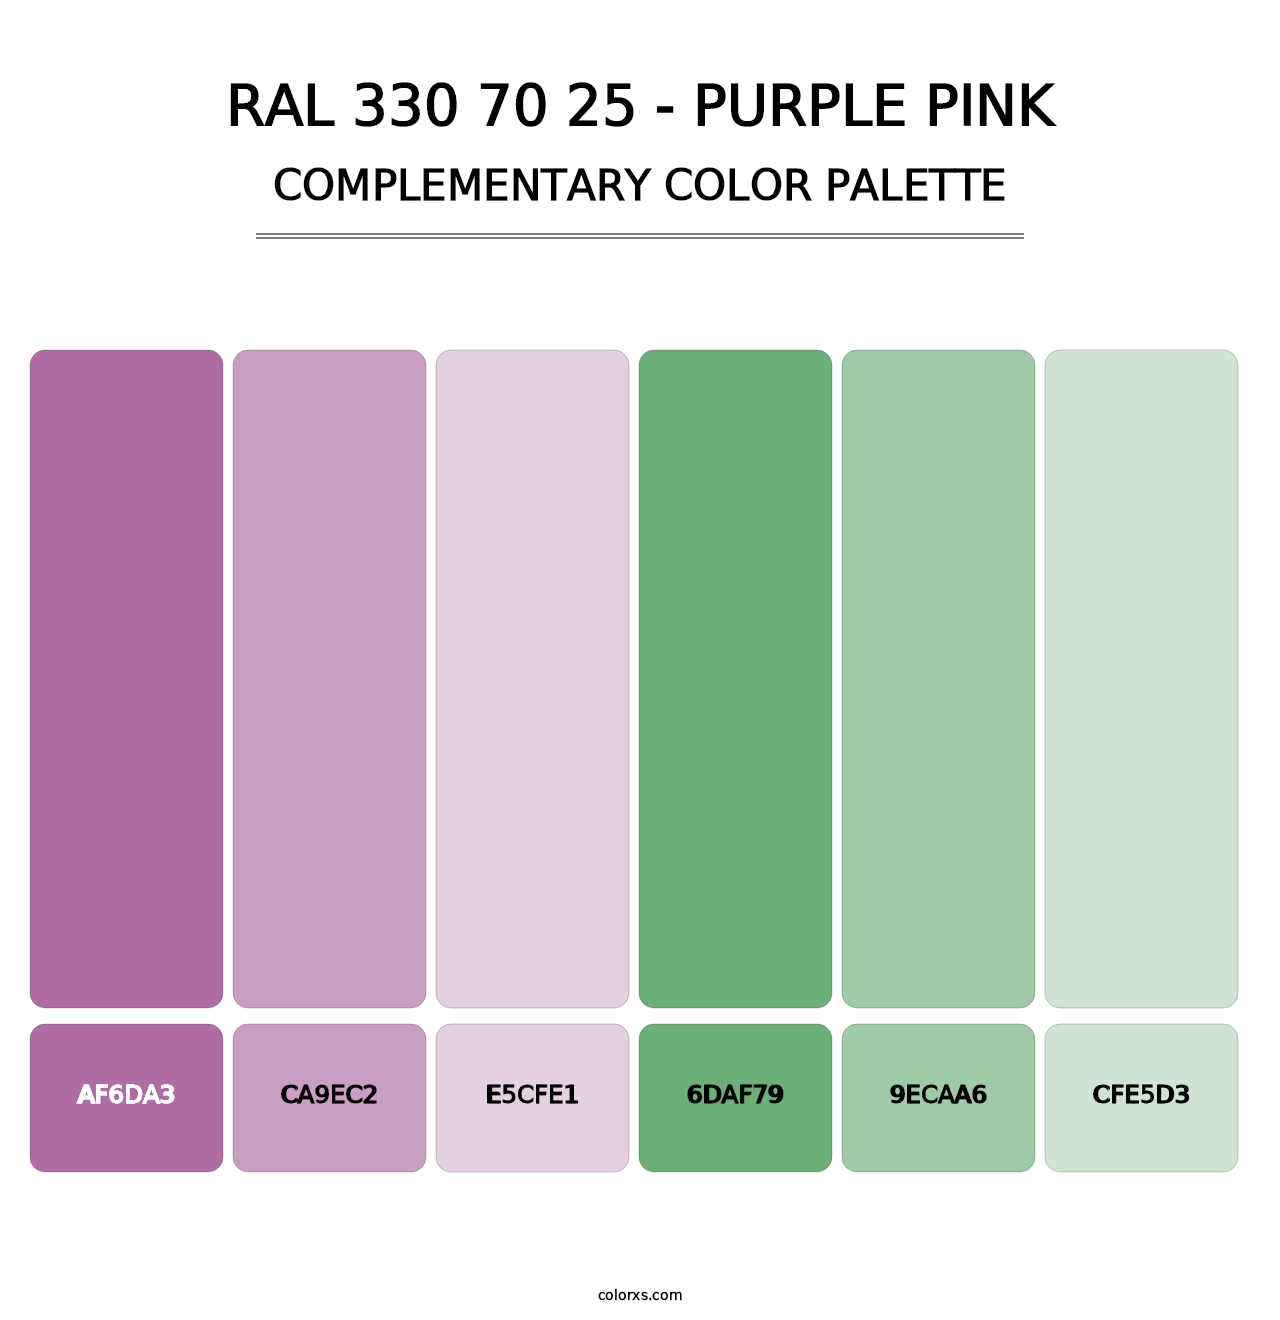 RAL 330 70 25 - Purple Pink - Complementary Color Palette